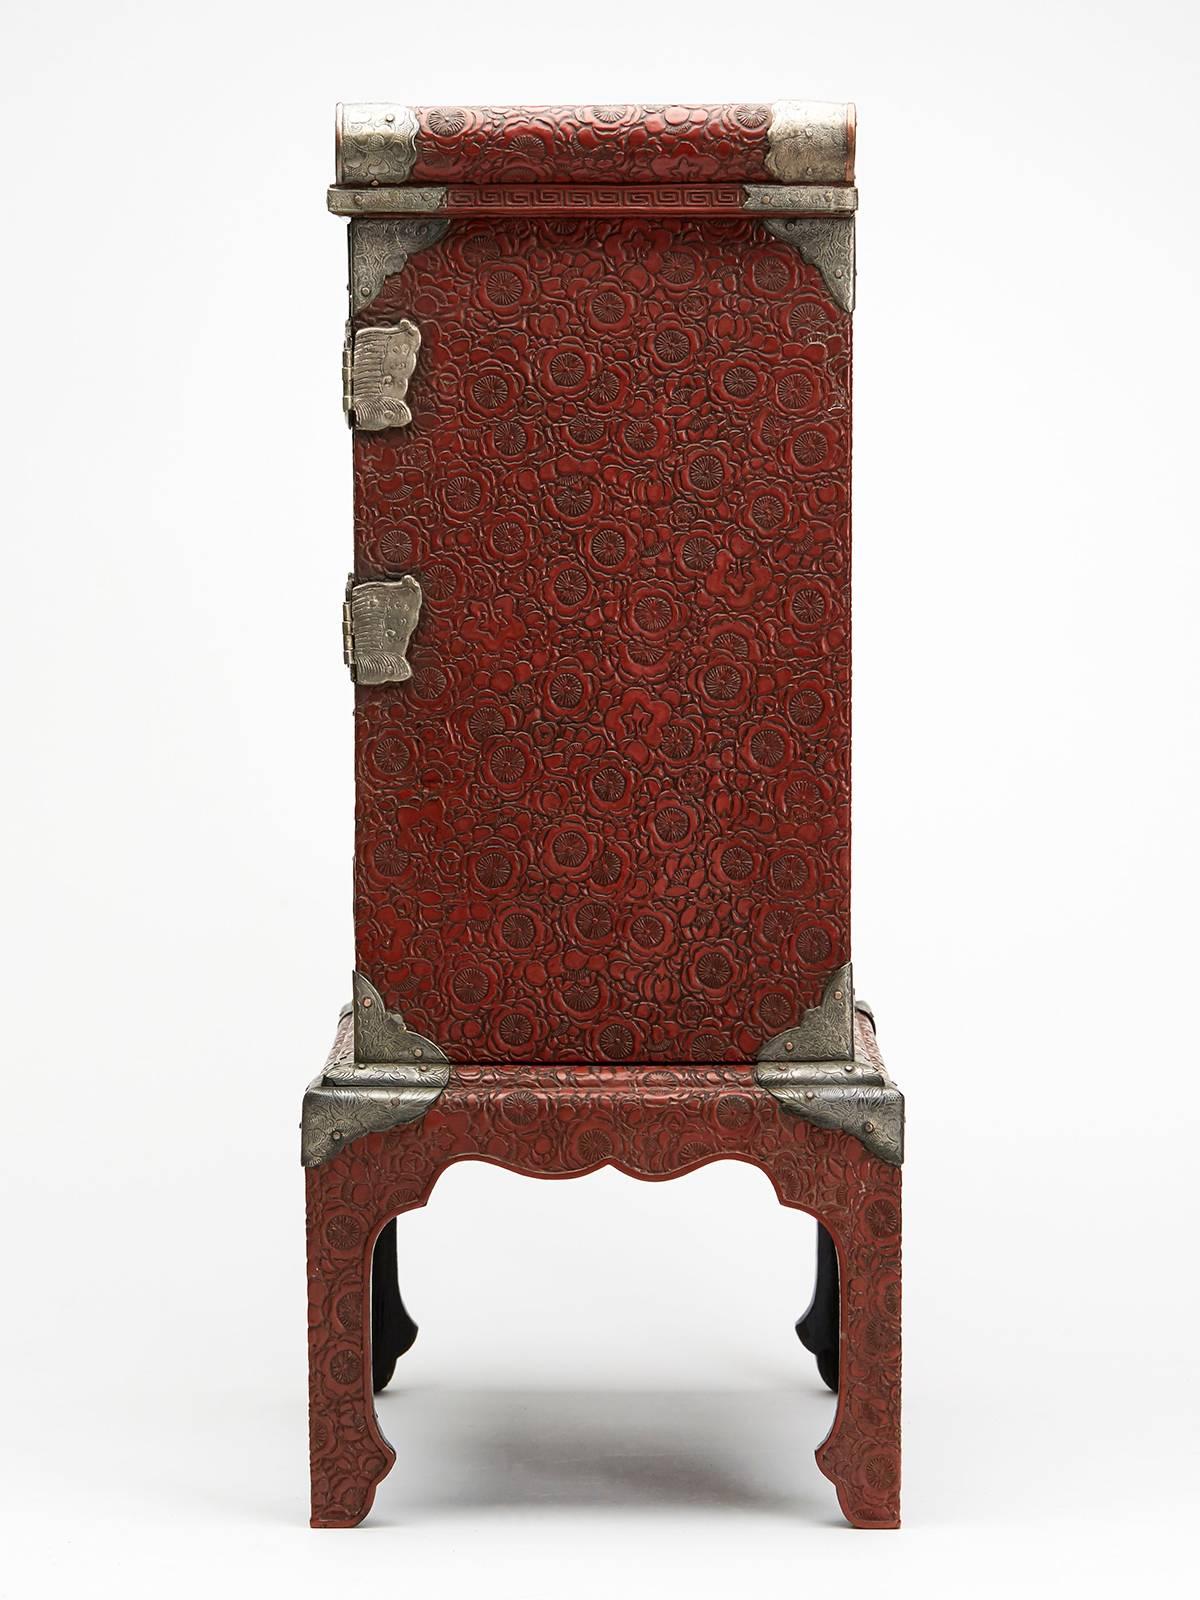 An exceptional antique Japanese red cinnabar lacquer table cabinet on stand inset with finely painted Satsuma panels, possibly Kinkozan, with engraved metal mounts with locking doors and drawer. This elegantly shaped cabinet has a pagoda shaped top